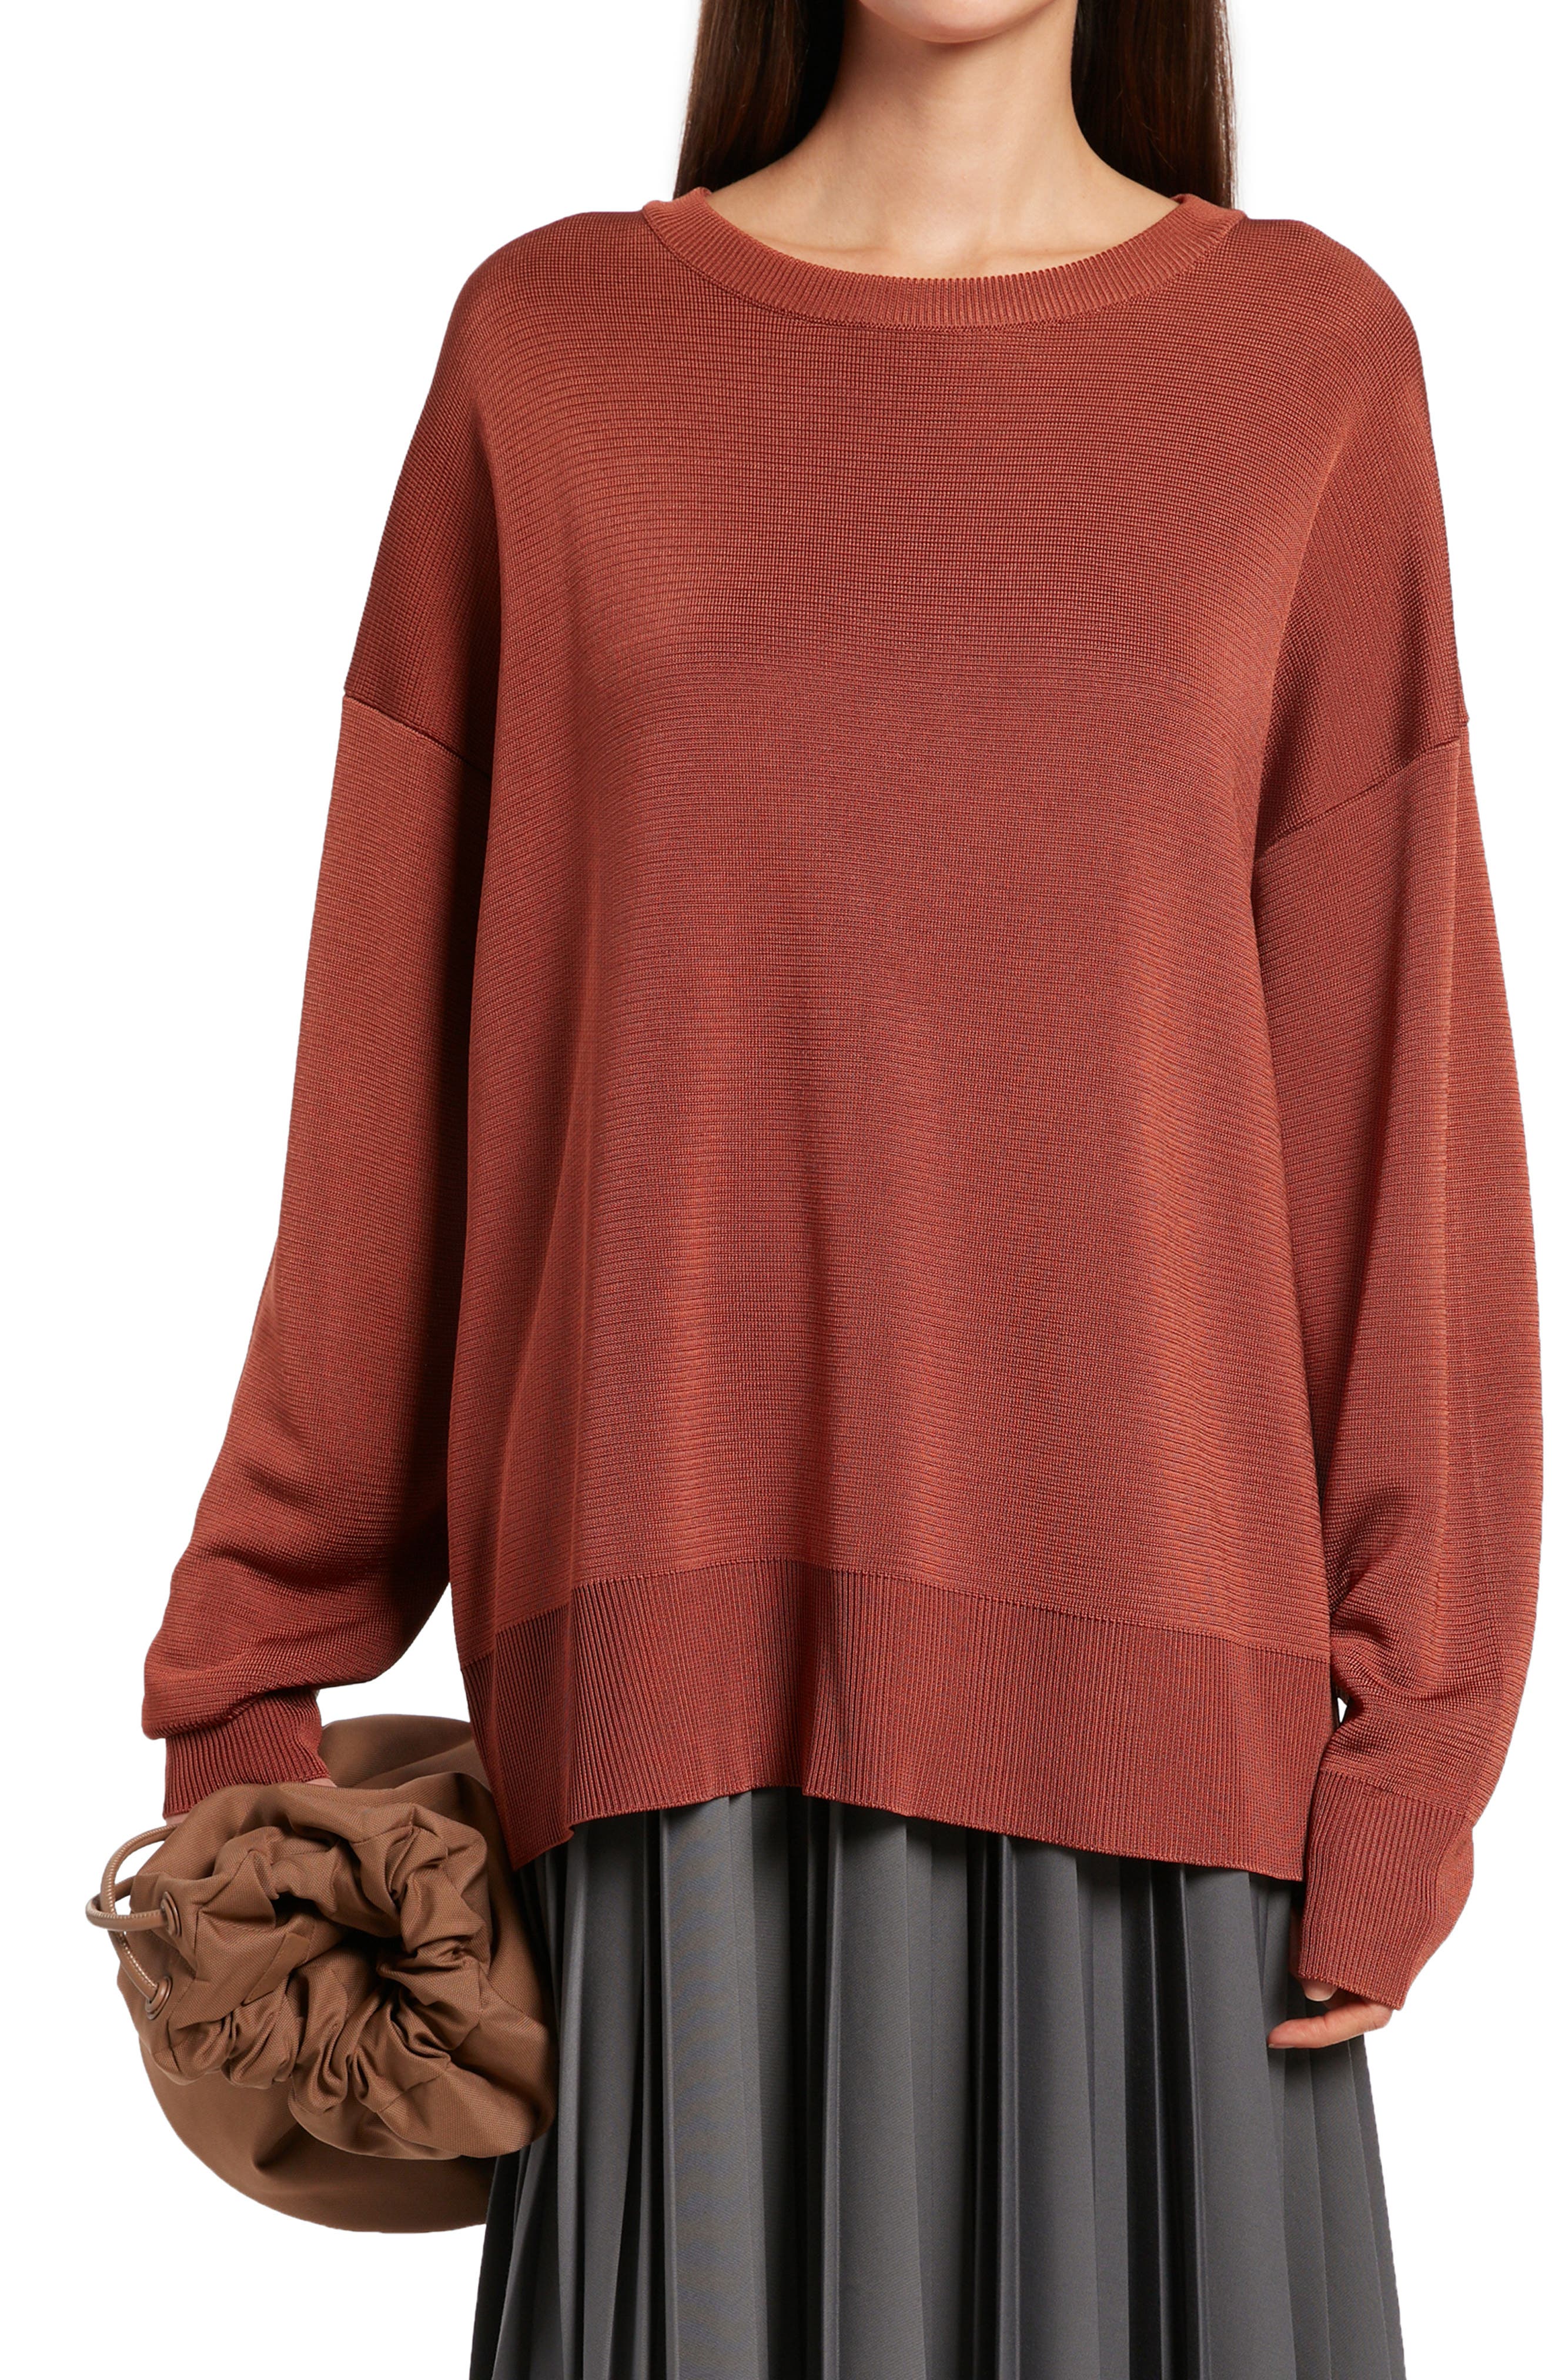 The Row Gabby Oversize Sweater in Paprika at Nordstrom, Size Small